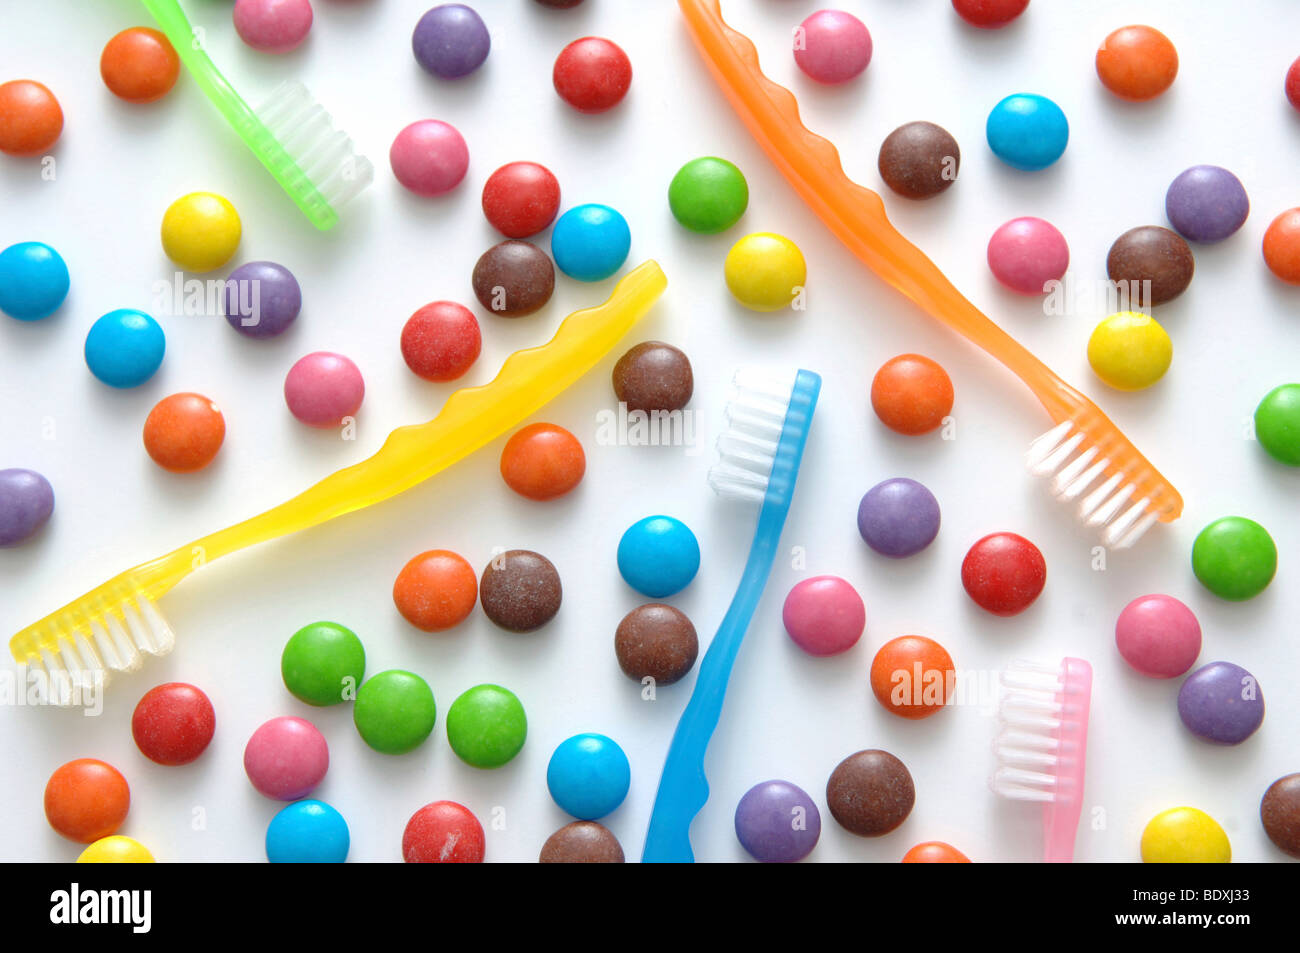 Colorful chocolate candies and toothbrushes Stock Photo